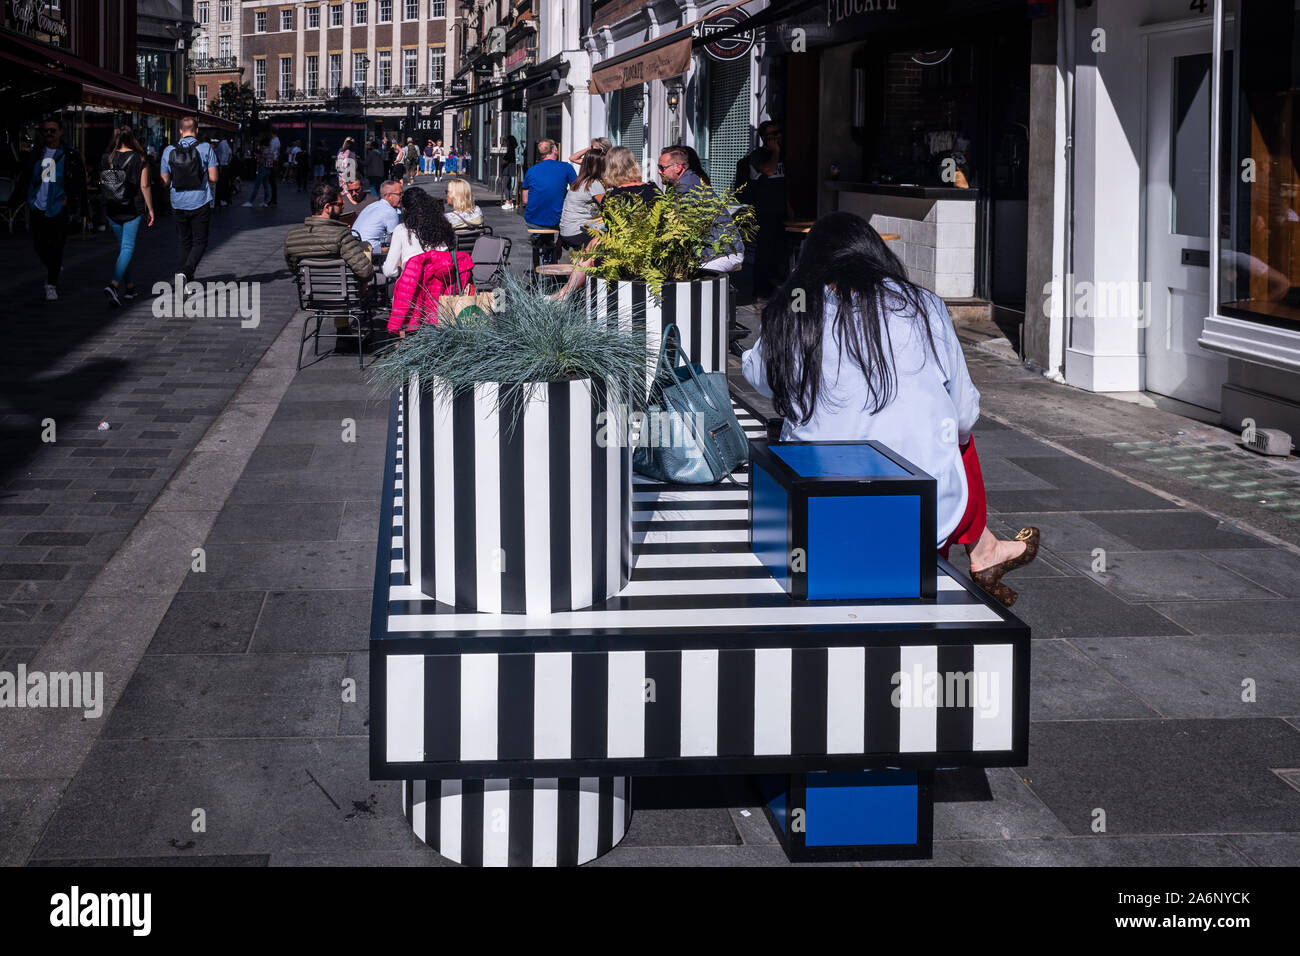 South Molton Street, Mayfair, pedestrian precinct in the heart of the City of Westminster, London, England, U.K. Stock Photo